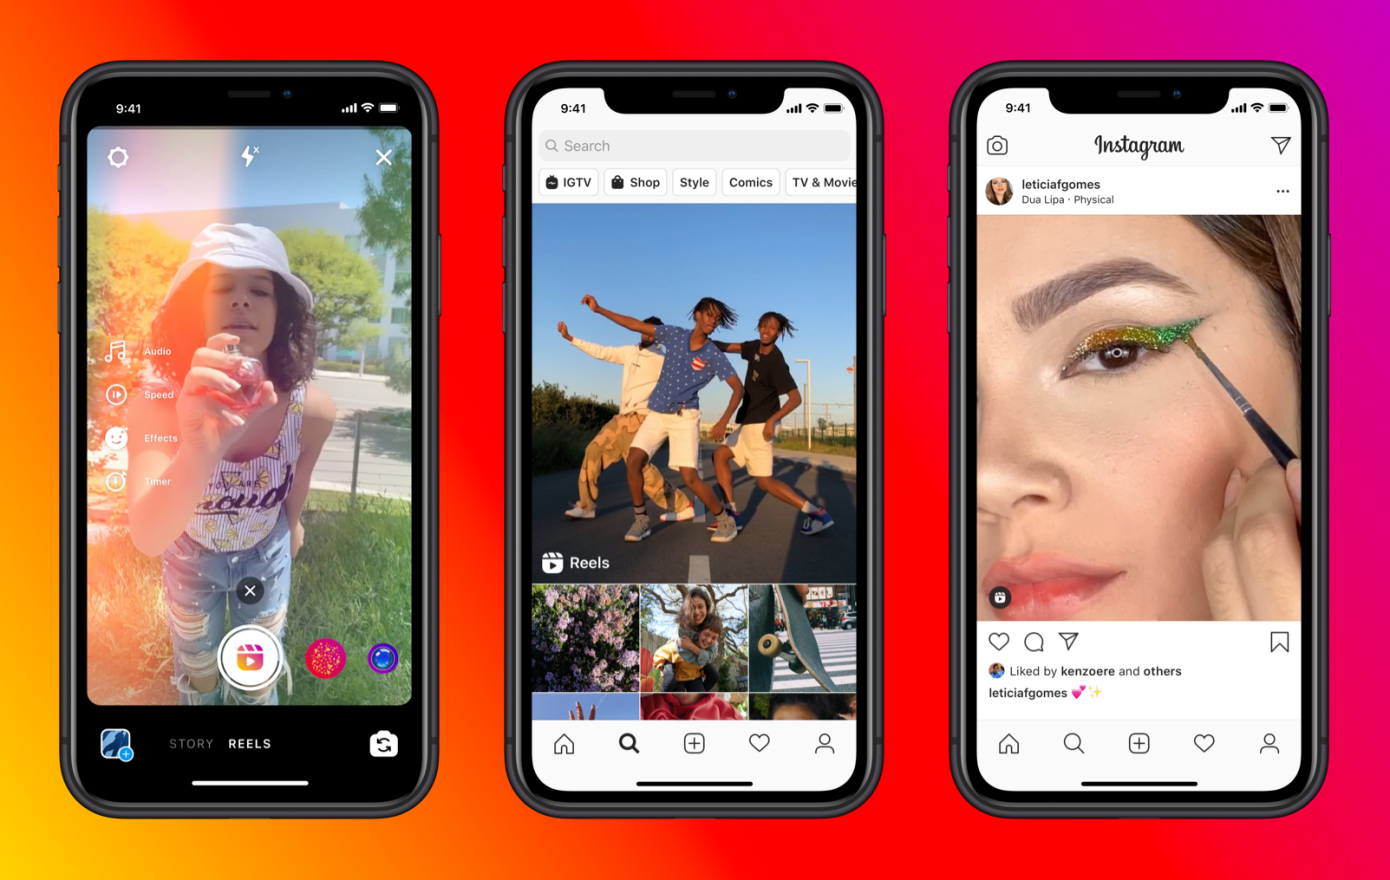 The Latest & Greatest Social Media Features of July 2020 - IG Reels